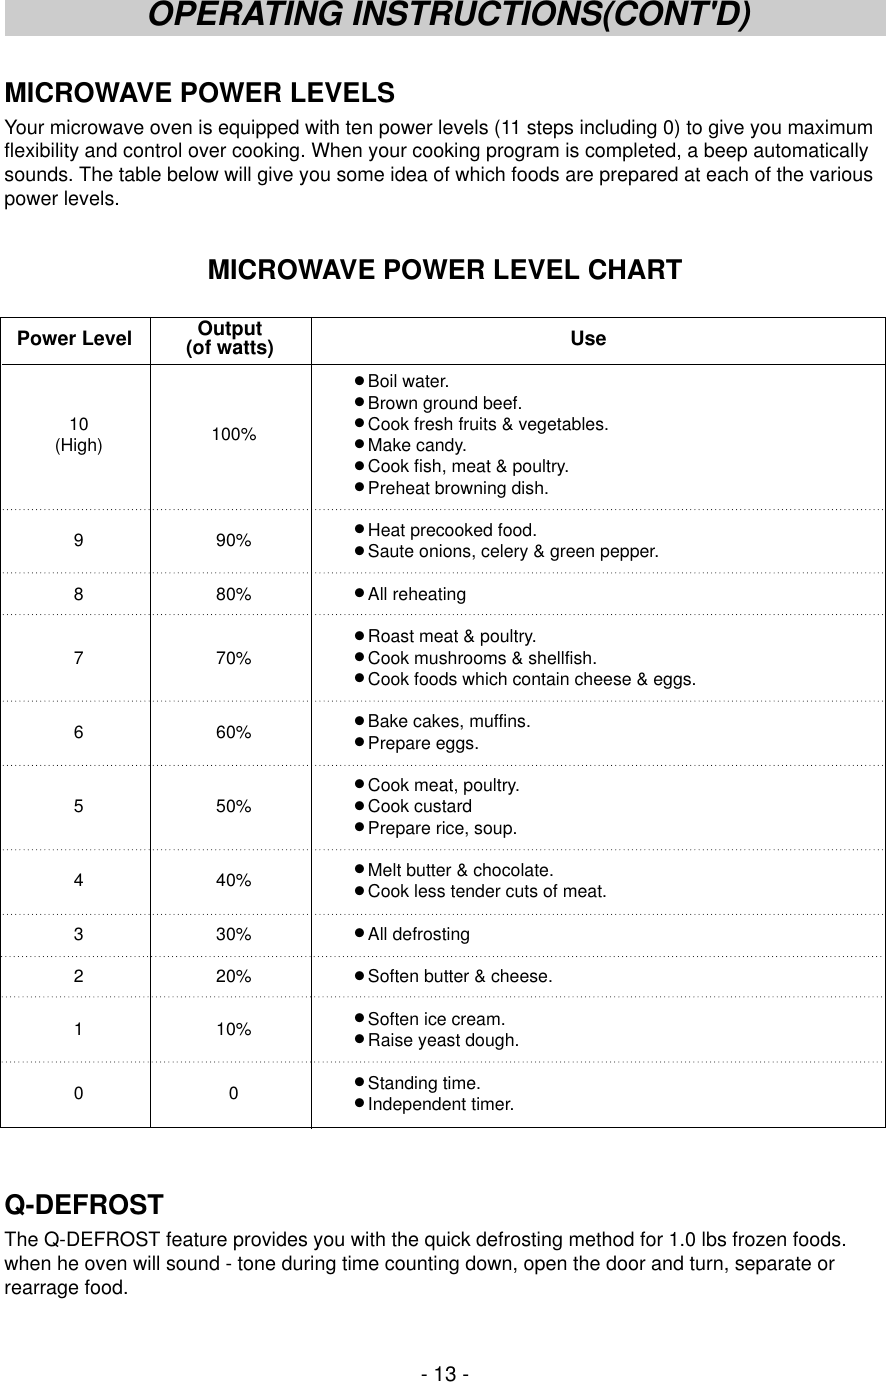 MICROWAVE POWER LEVELSYour microwave oven is equipped with ten power levels (11 steps including 0) to give you maximumflexibility and control over cooking. When your cooking program is completed, a beep automaticallysounds. The table below will give you some idea of which foods are prepared at each of the variouspower levels.MICROWAVE POWER LEVEL CHARTQ-DEFROSTThe Q-DEFROST feature provides you with the quick defrosting method for 1.0 lbs frozen foods.when he oven will sound - tone during time counting down, open the door and turn, separate orrearrage food. - 13 -OPERATING INSTRUCTIONS(CONT&apos;D)Power Level Use● Boil water.● Brown ground beef.10 100% ● Cook fresh fruits &amp; vegetables.(High) ● Make candy.● Cook fish, meat &amp; poultry.● Preheat browning dish.9 90% ● Heat precooked food.● Saute onions, celery &amp; green pepper.8 80% ● All reheating● Roast meat &amp; poultry.7 70% ● Cook mushrooms &amp; shellfish.● Cook foods which contain cheese &amp; eggs.6 60% ● Bake cakes, muffins.● Prepare eggs.● Cook meat, poultry.5 50% ● Cook custard● Prepare rice, soup.4 40% ● Melt butter &amp; chocolate.● Cook less tender cuts of meat.3 30% ● All defrosting2 20% ● Soften butter &amp; cheese.1 10% ● Soften ice cream.● Raise yeast dough.00● Standing time.● Independent timer.Output (of watts)